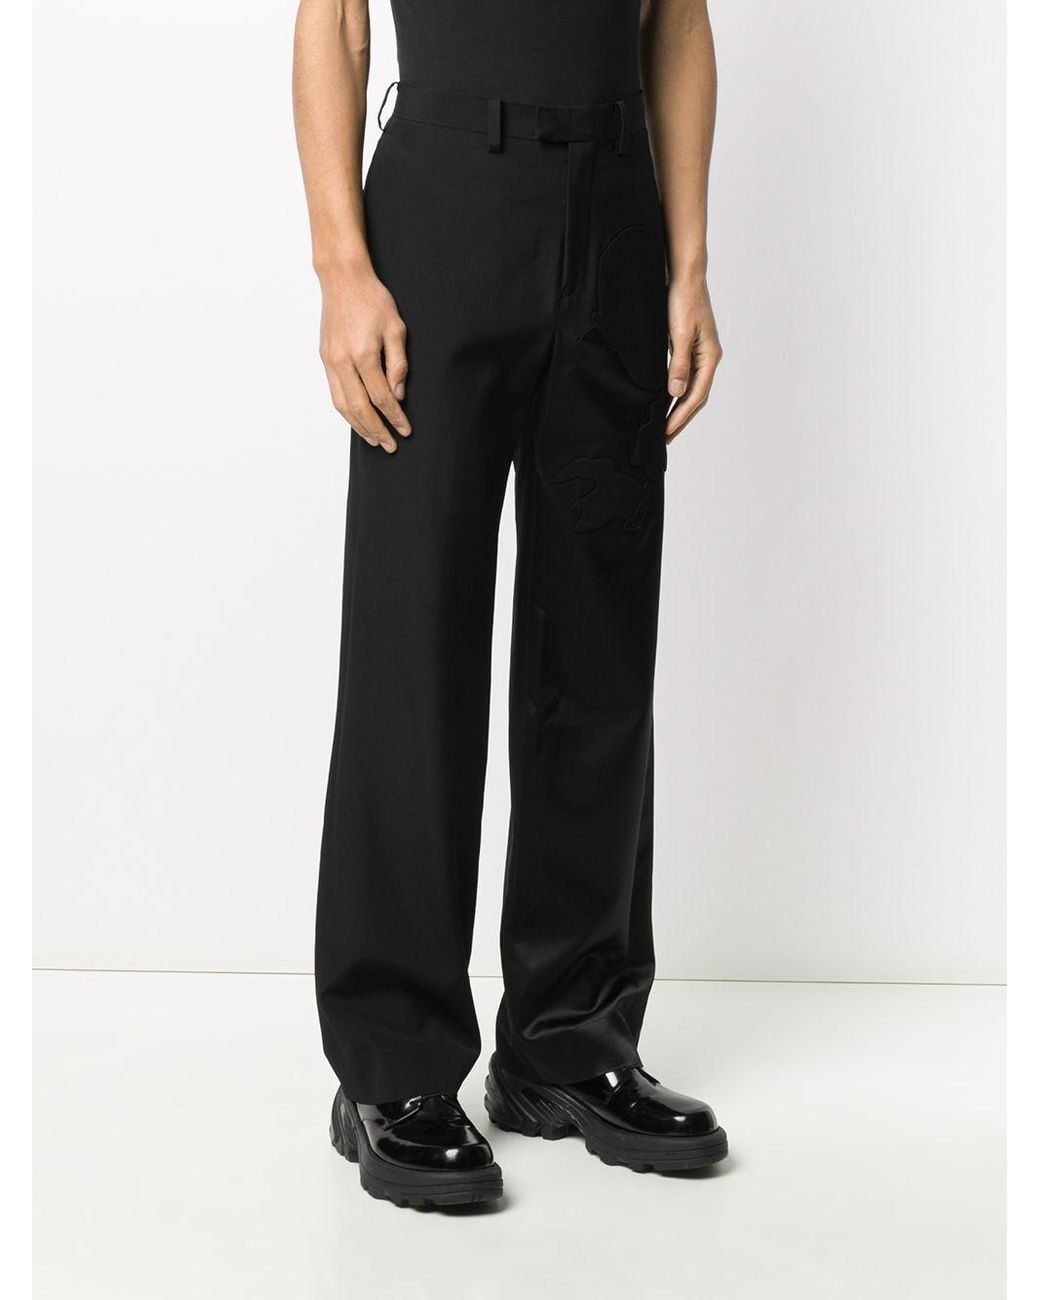 black high waisted flared trousers